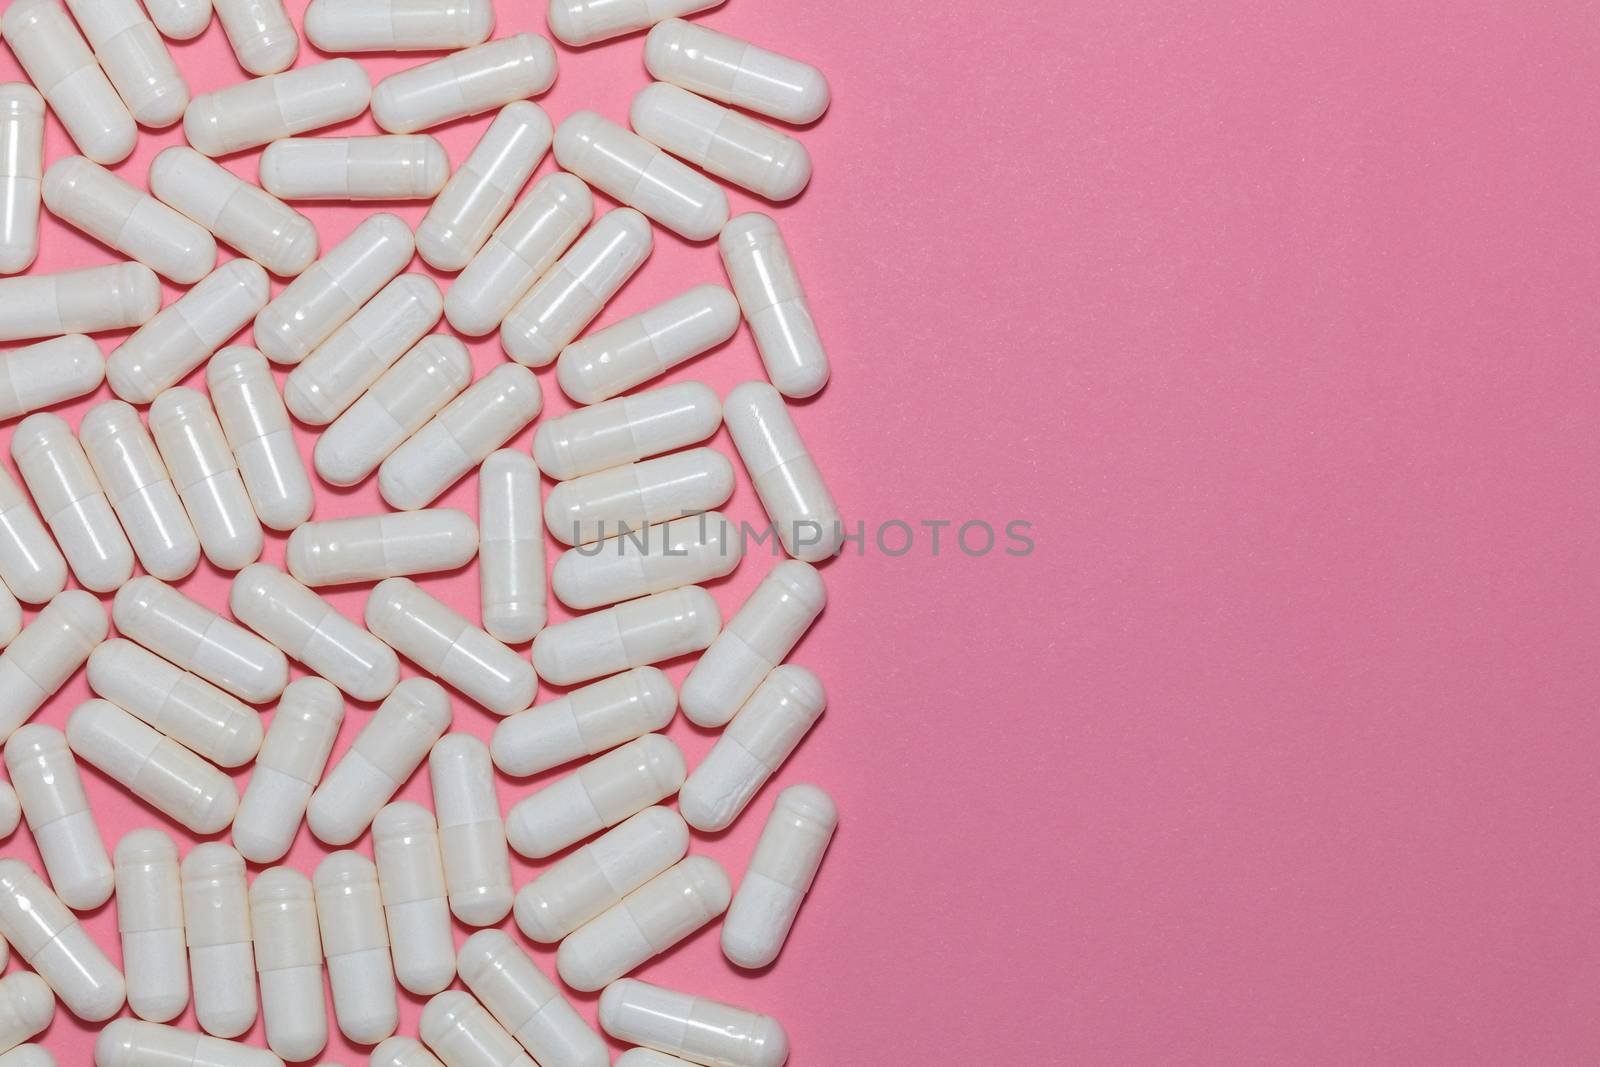 Top view of white pills on pink background with copy space. Healthcare, medical and pharmaceutical concept. by DamantisZ